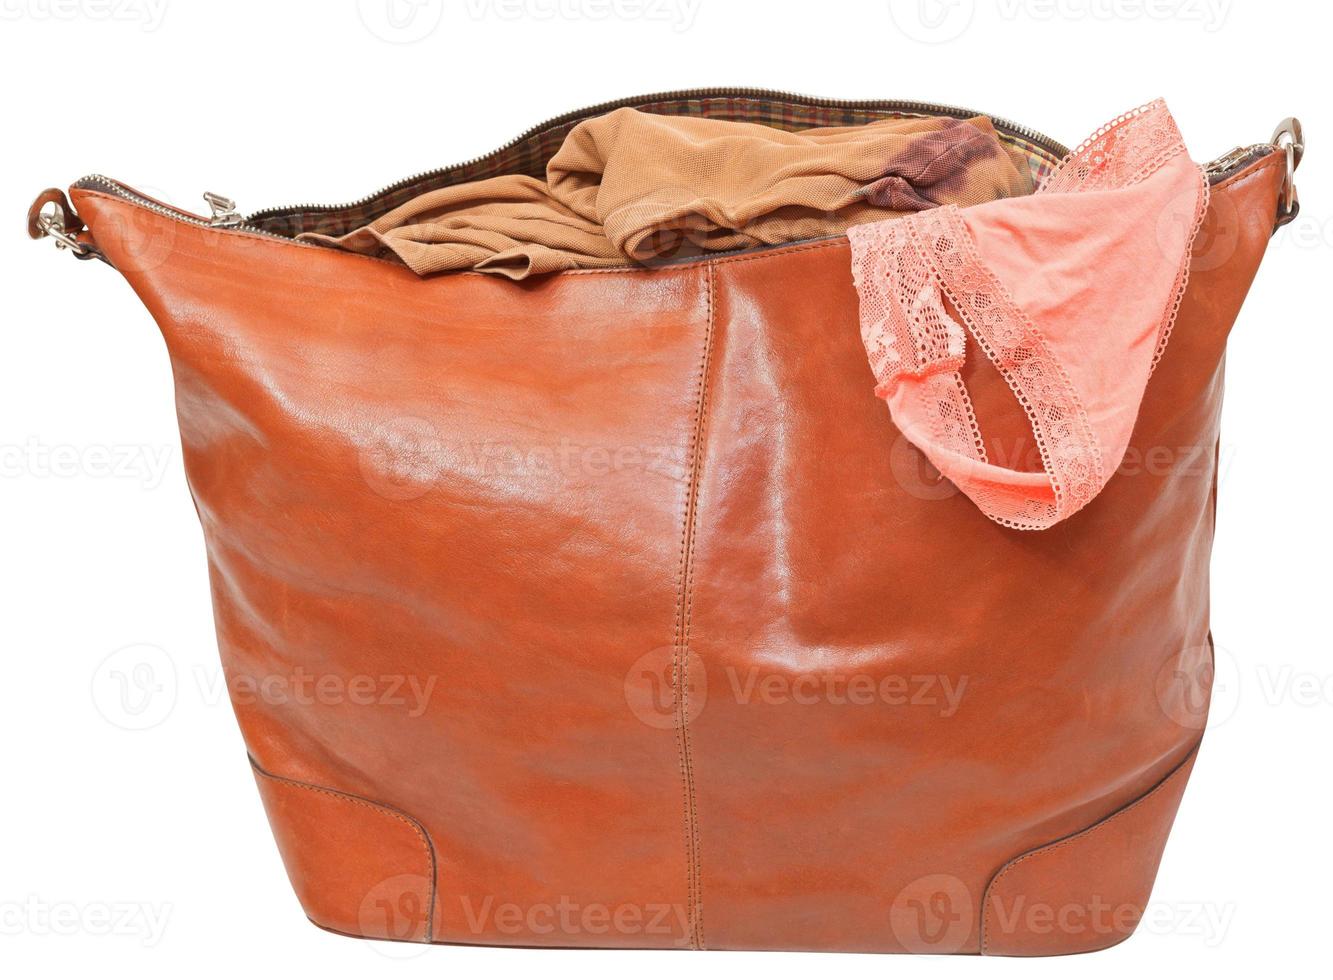 leather handbag with blouse and pink lace panties photo